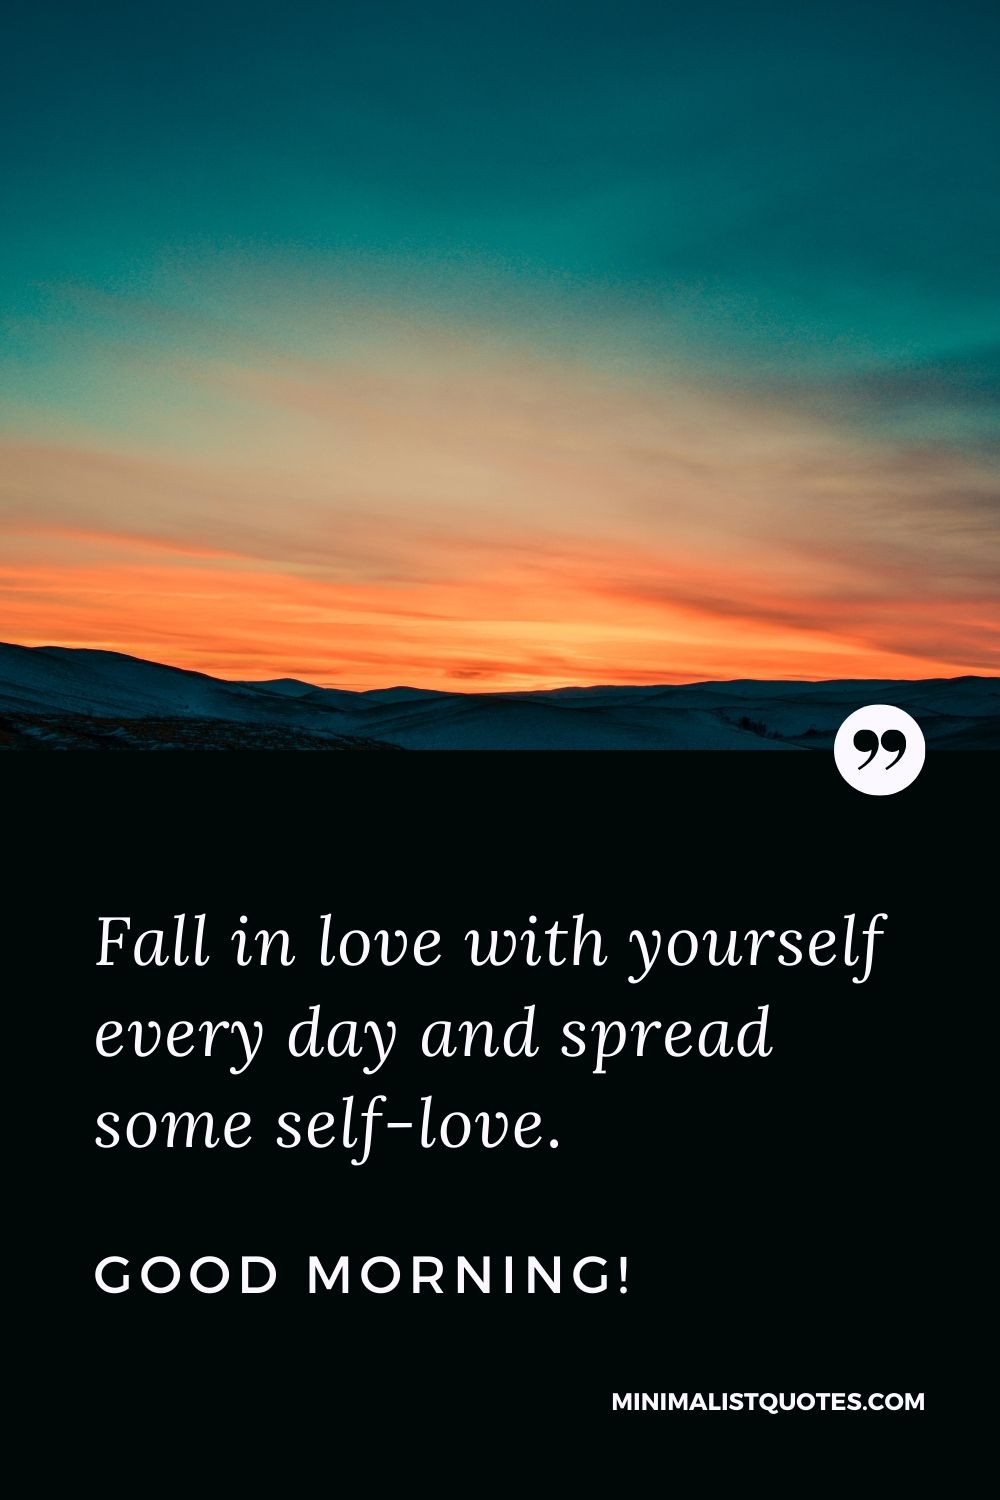 Morning Quote, Wish & Message With Image: Fall in love with yourself every day and spread some self-love. Good Morning!